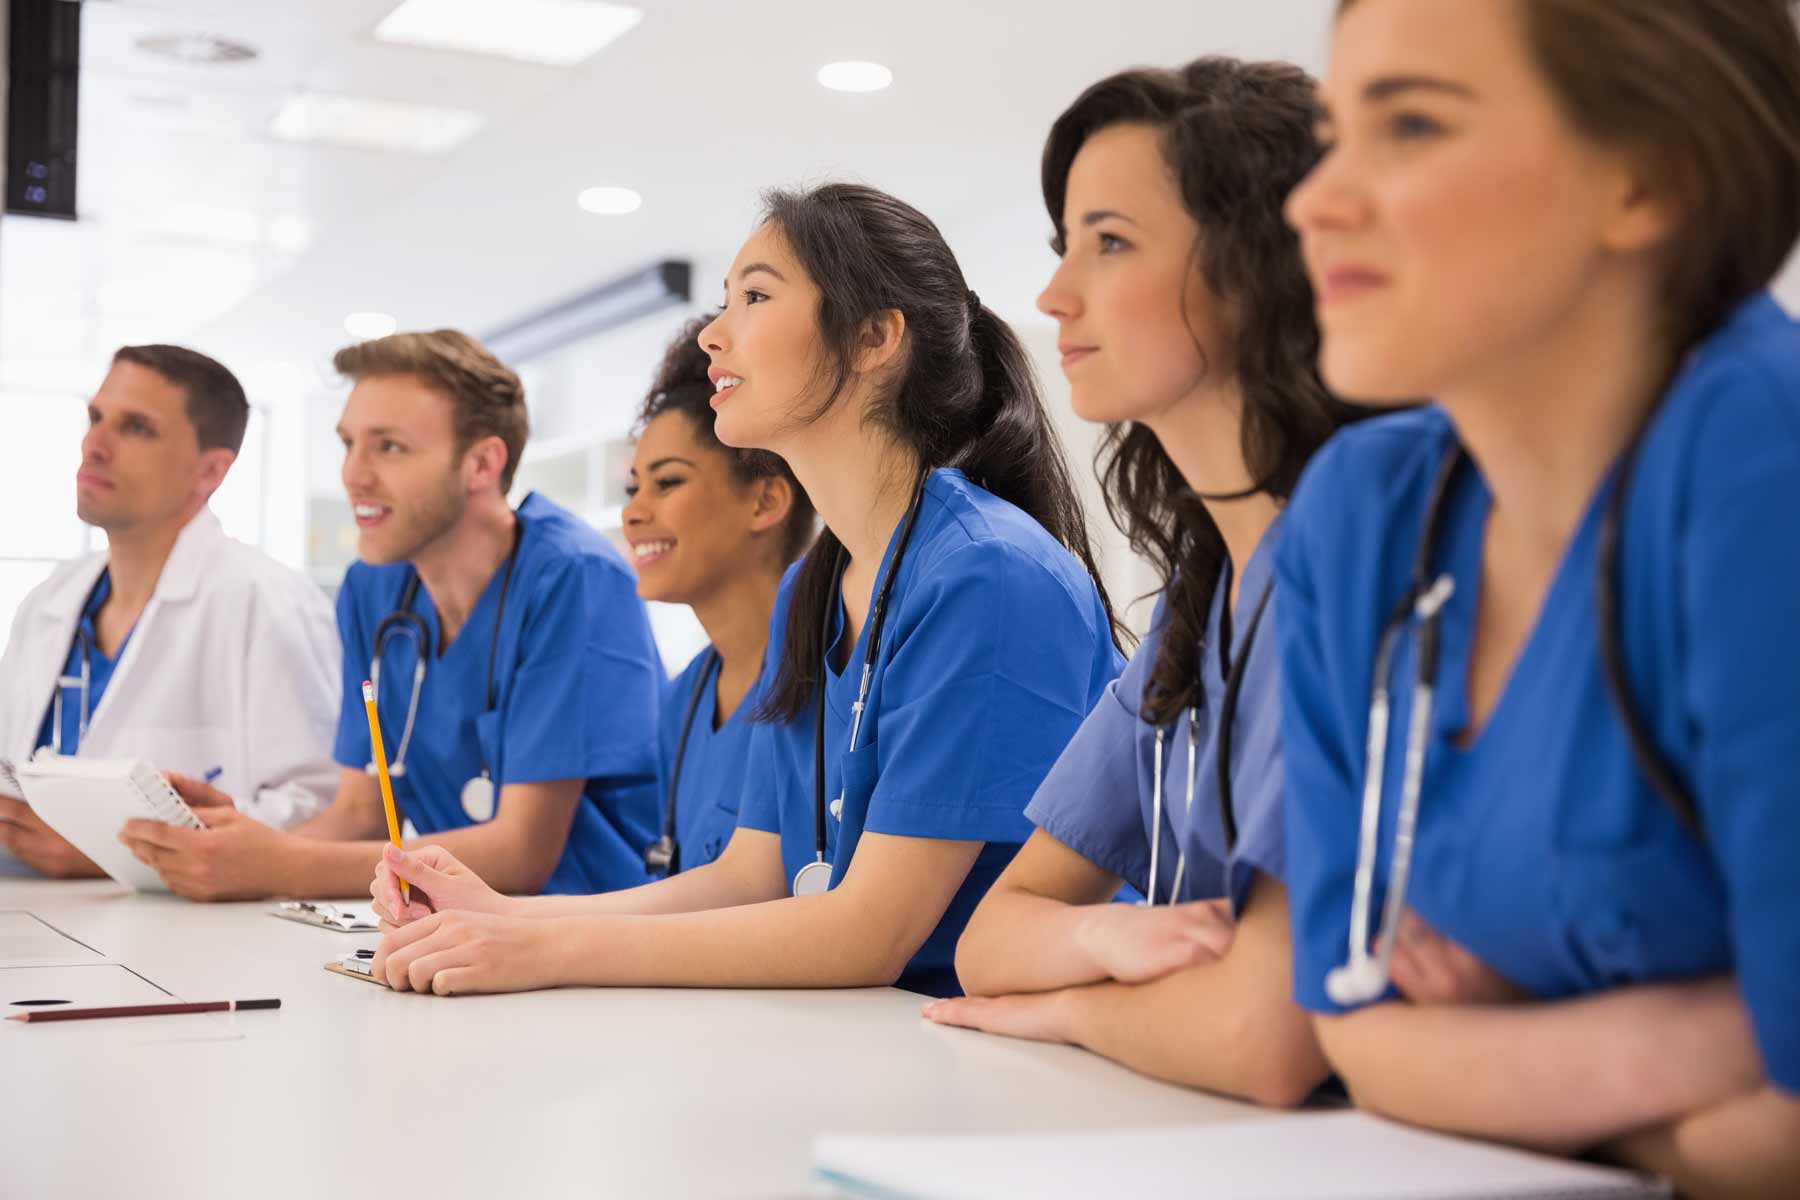 How Much Does Medical School Cost? (2023 Guide)